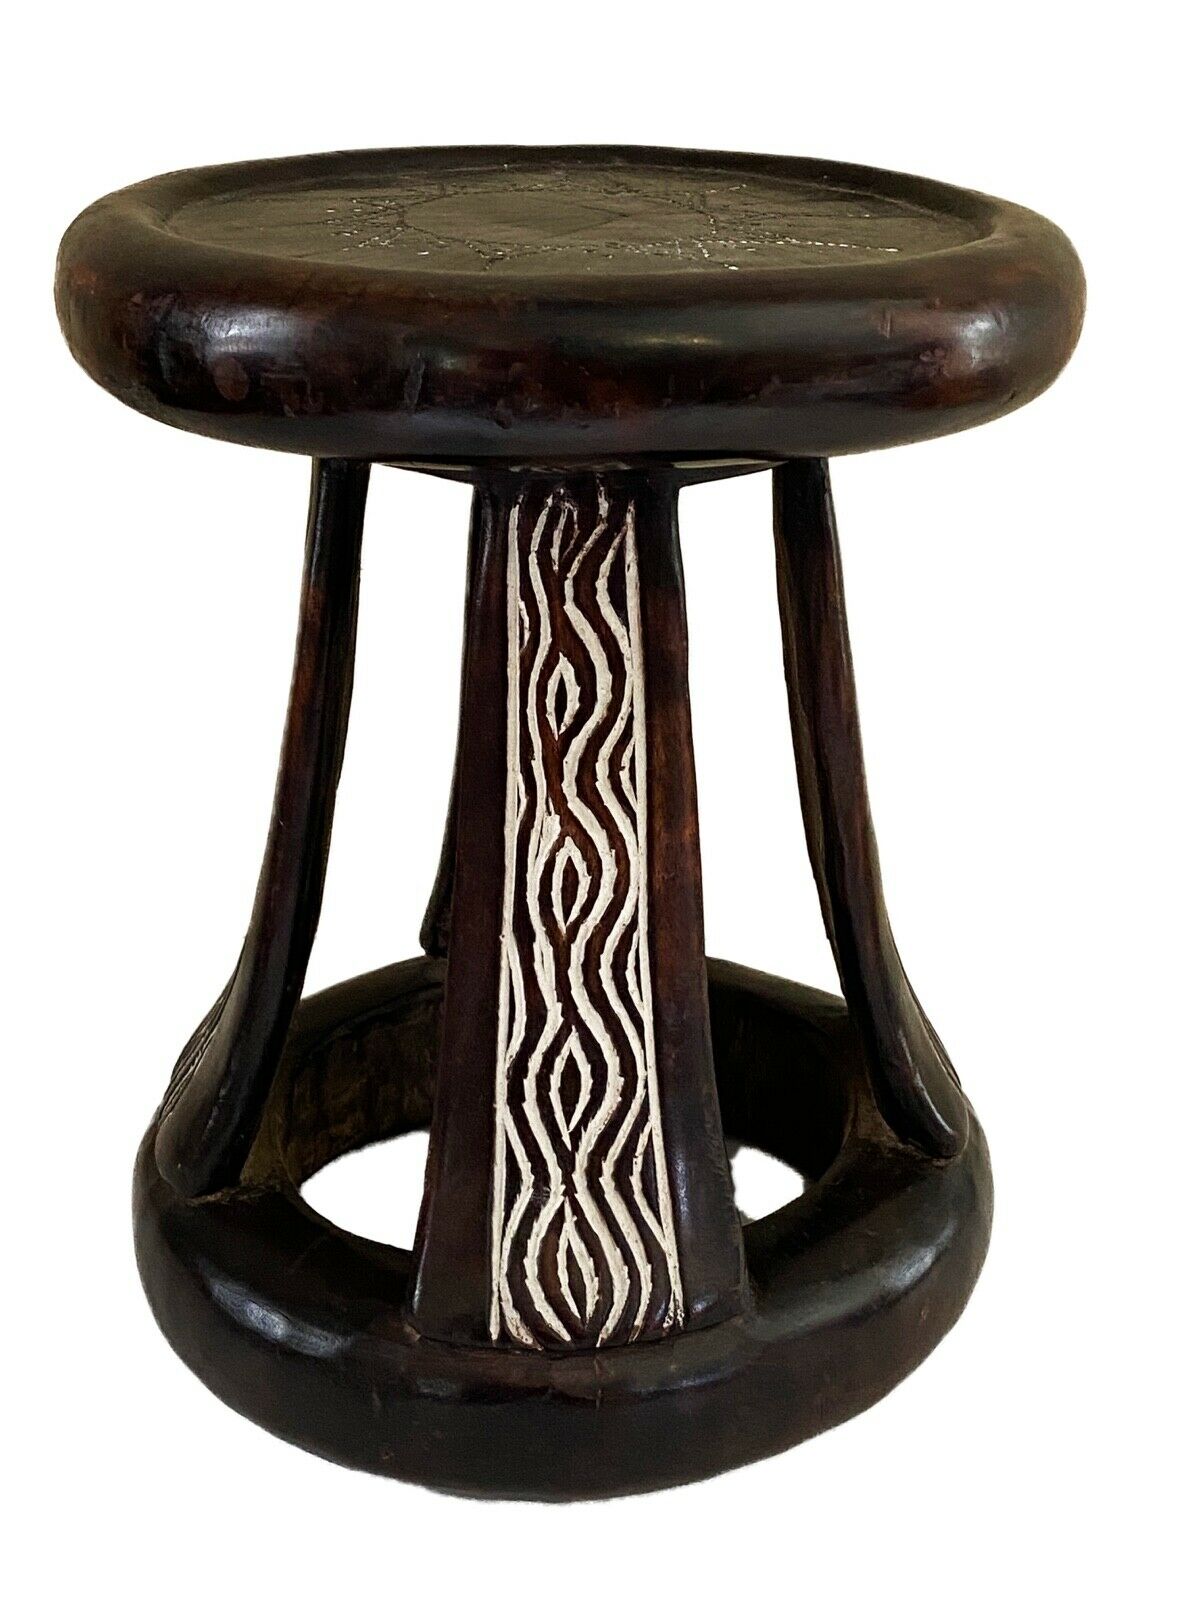 Superb African Baule Low Stool With Carved Pattern 10.75" H